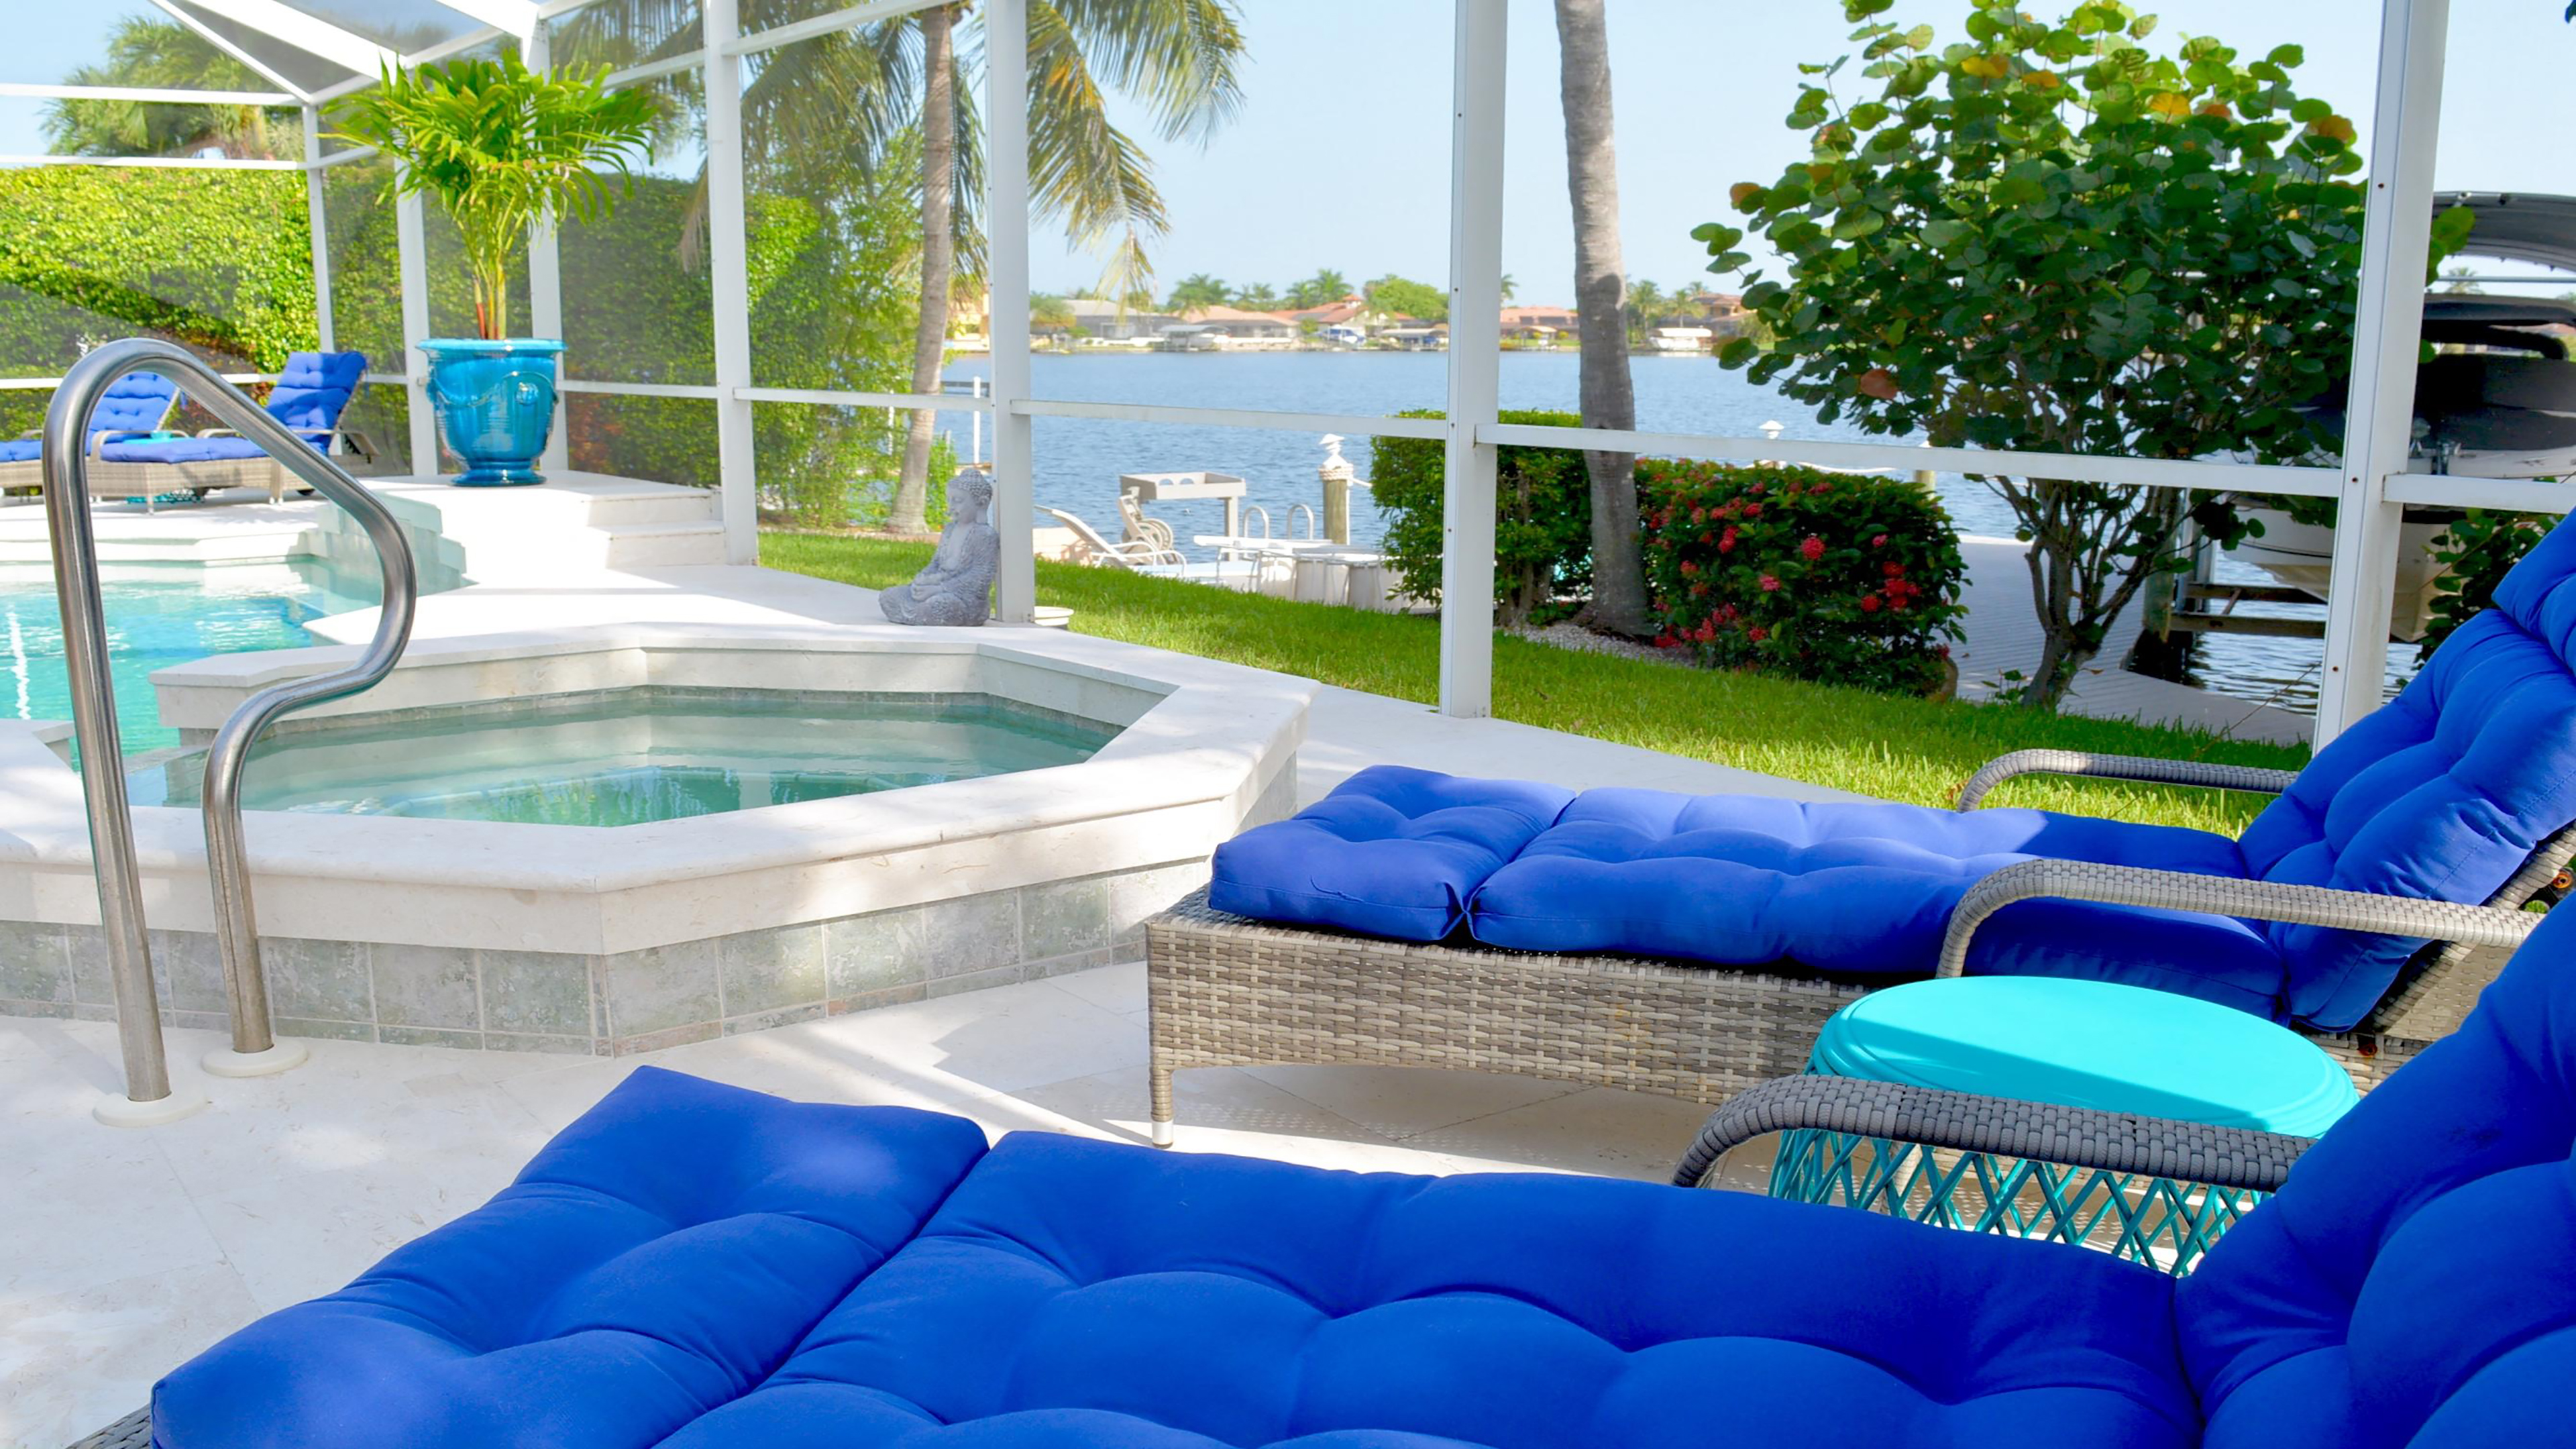 Comfortable lounge chairs are waiting just for you